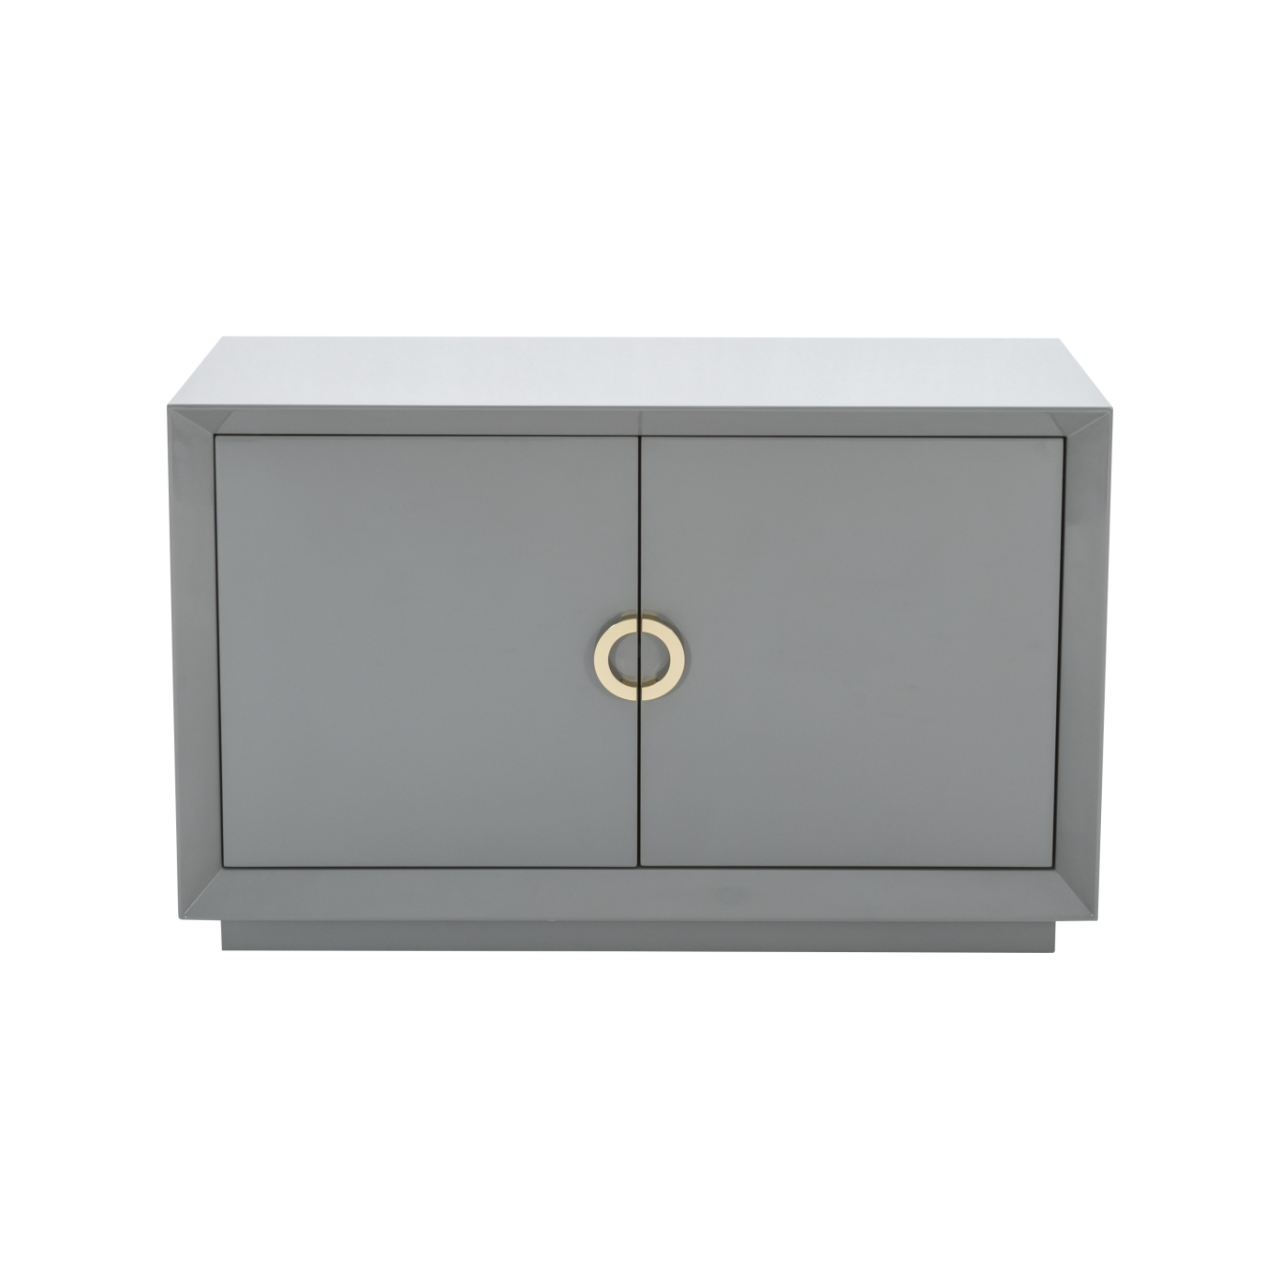 high gloss sideboard in grey with simple semi-circle gold handles